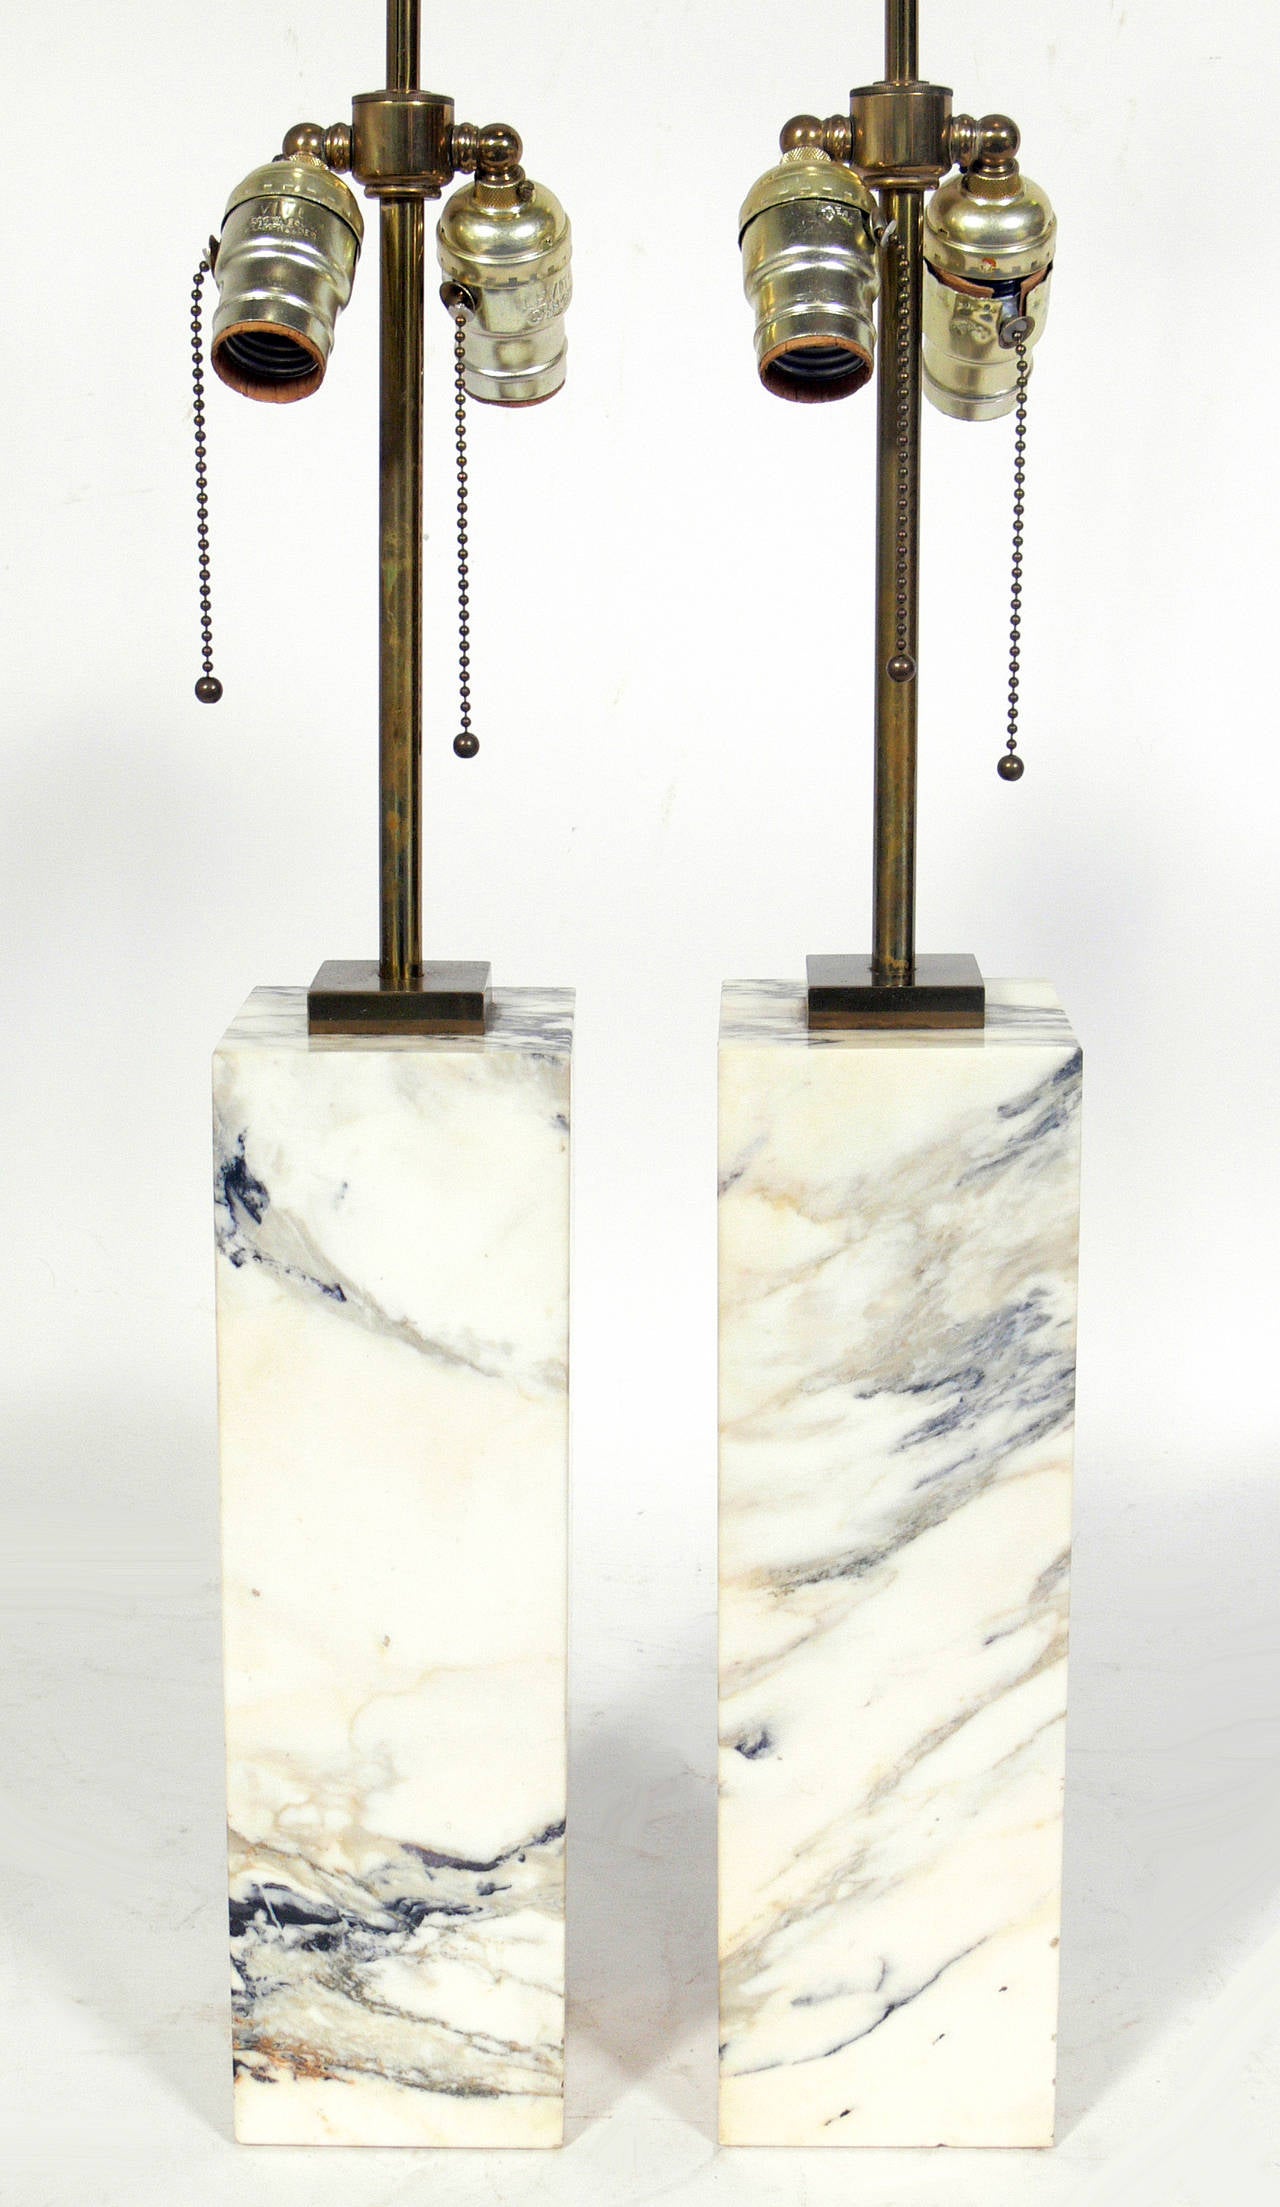 Pair of Marble Lamps designed by T.H. Robsjohn Gibbings for Hansen, circa 1950's. Clean lined architectural design in an ivory colored marble with gray, tan, and black veining. Brass hardware retains warm original patina. If you prefer, we can